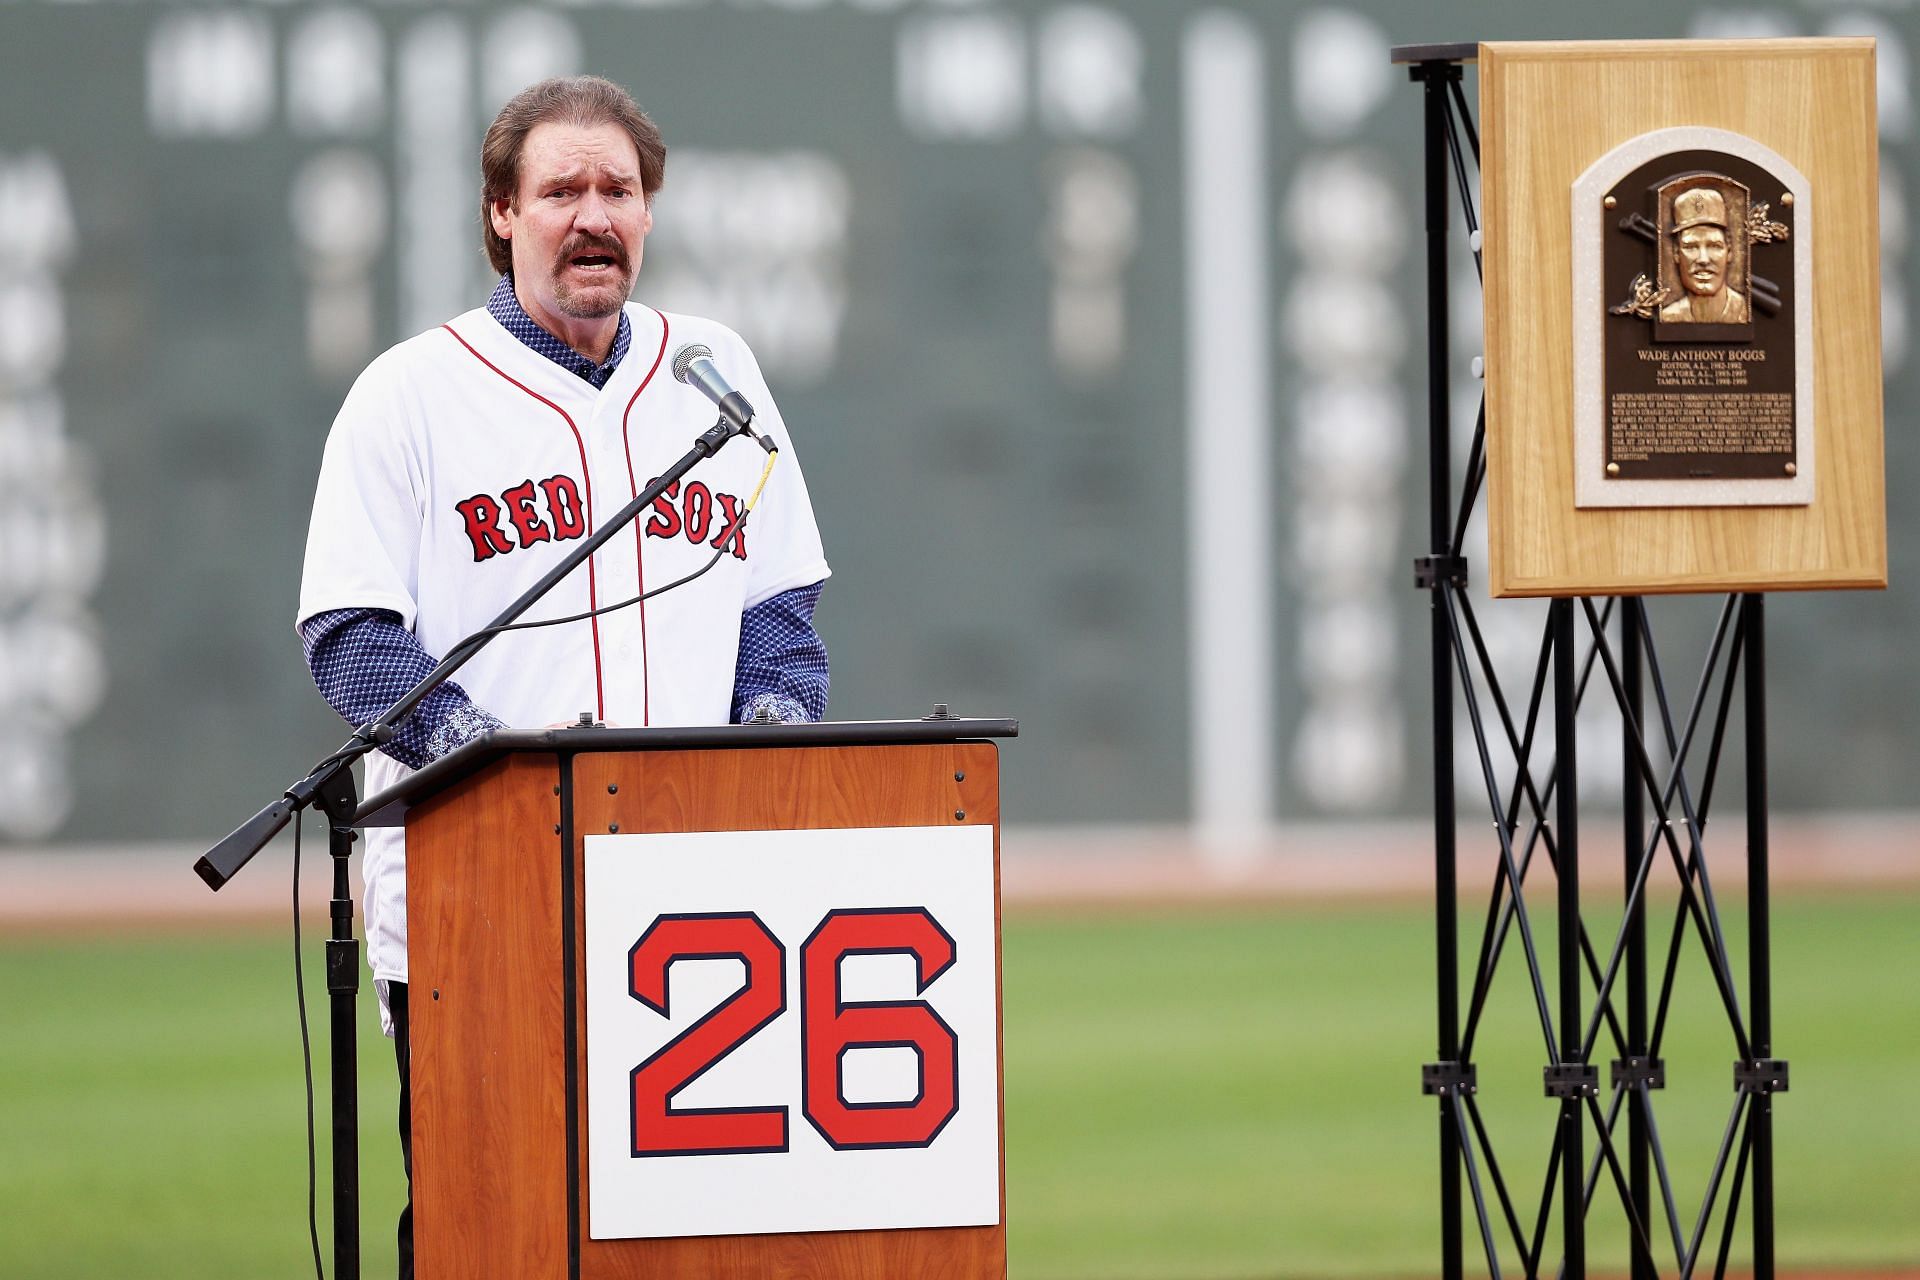 Red Sox Notes: Retiring No. 26 leaves Wade Boggs 'extremely honored